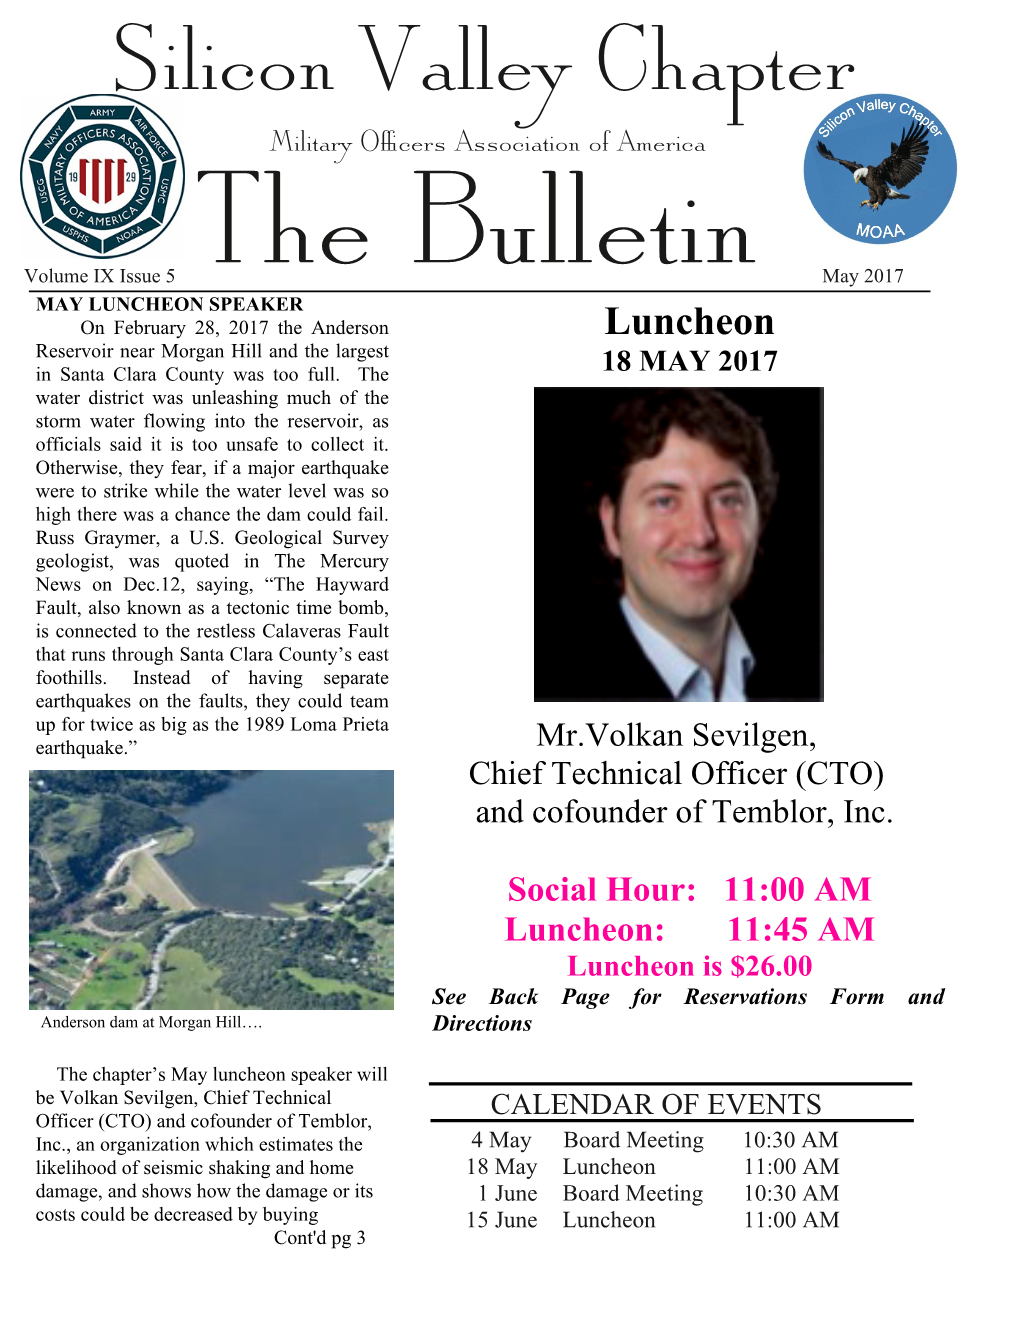 May 2017 MAY Luncheonthe SPEAKER Bulletin on February 28, 2017 the Anderson Luncheon Reservoir Near Morgan Hill and the Largest in Santa Clara County Was Too Full